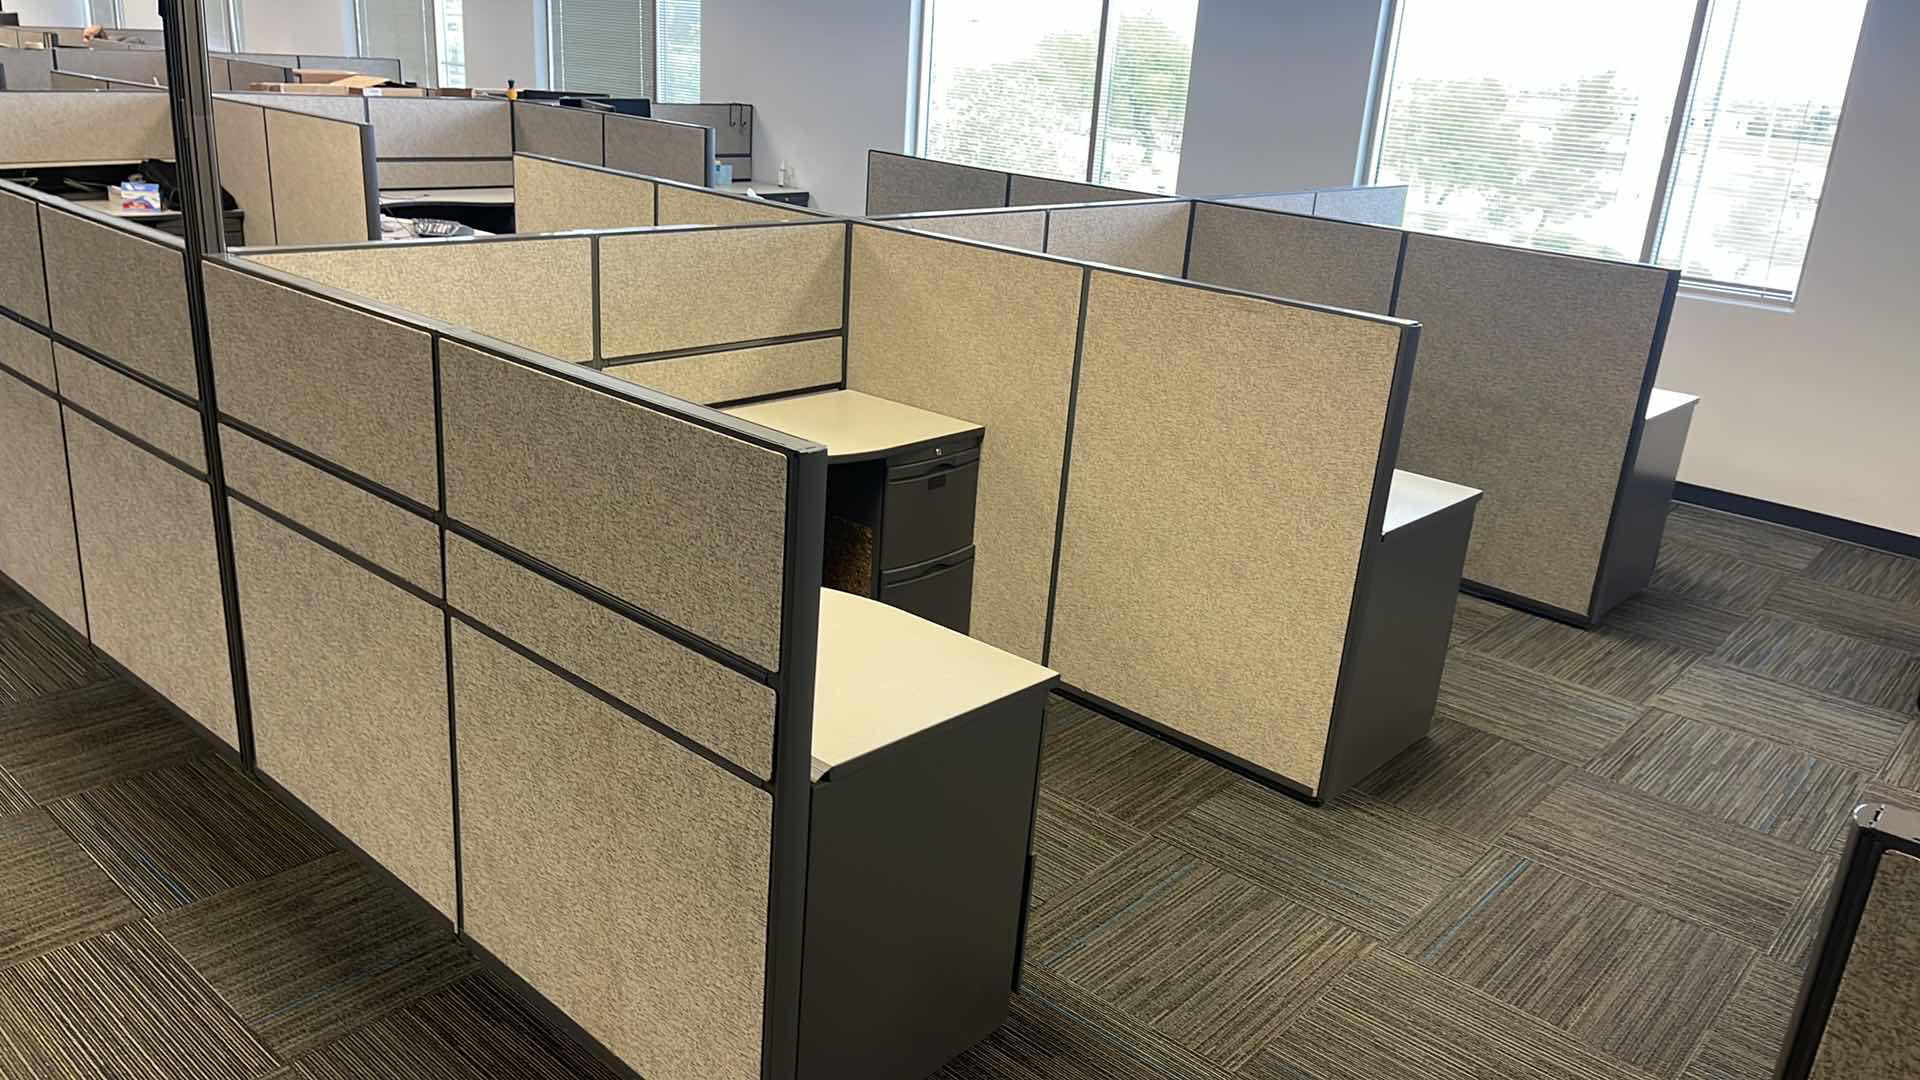 Photo 1 of 6 PC CUBICAL SET W 5 DRAWER MEDAL BASE DESKS 76” X 76” H50” (BUYER TO DISASSEMBLE & REMOVE FROM 2ND STORY OFFICE BUILDING W ELEVATOR)